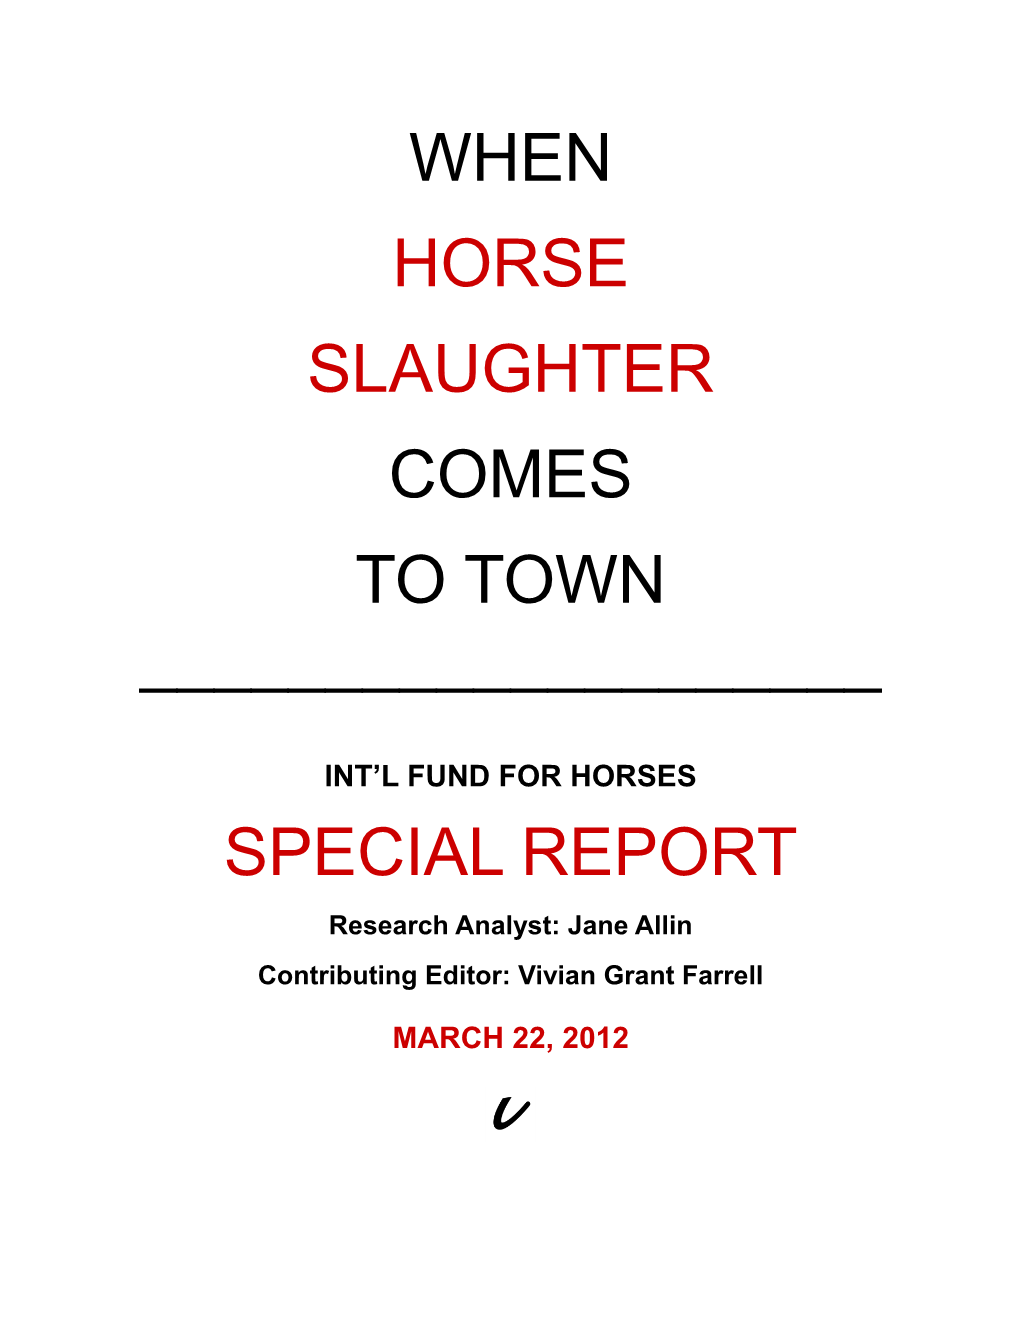 HISTORICALLY, the Negative Environmental Impact of Horse Slaughter Plants Has Been Well Documented